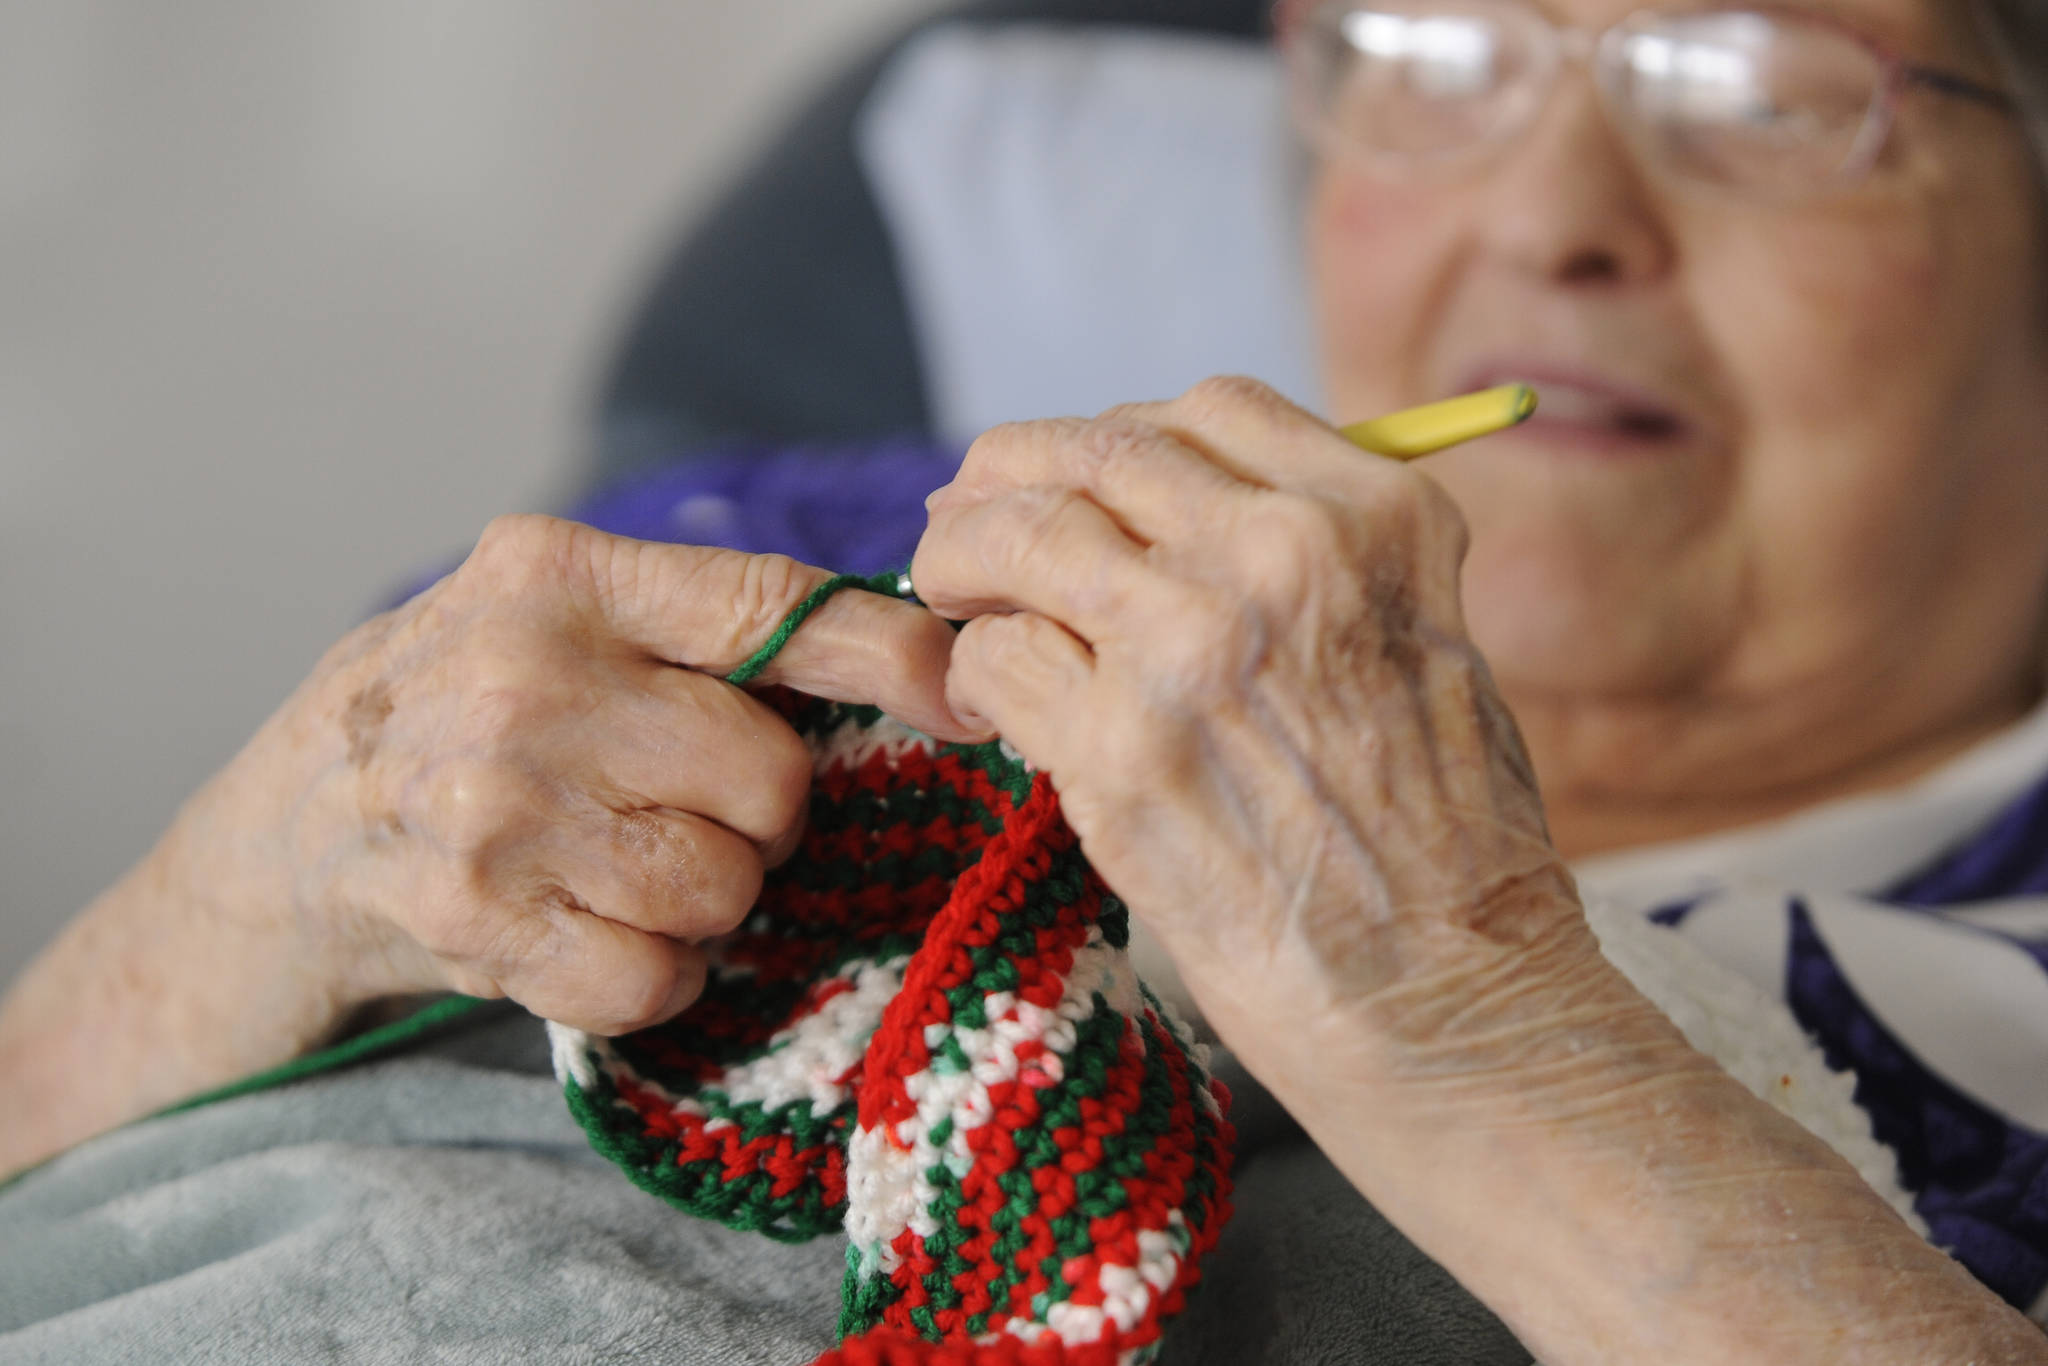 Phyllis Peashka says she taught herself to crochet. She figures she makes at least one hat, scarf or potholder per day. “My hands cramp up, but I keep going.” (Michael Dashiell/Olympic Peninsula News Group)